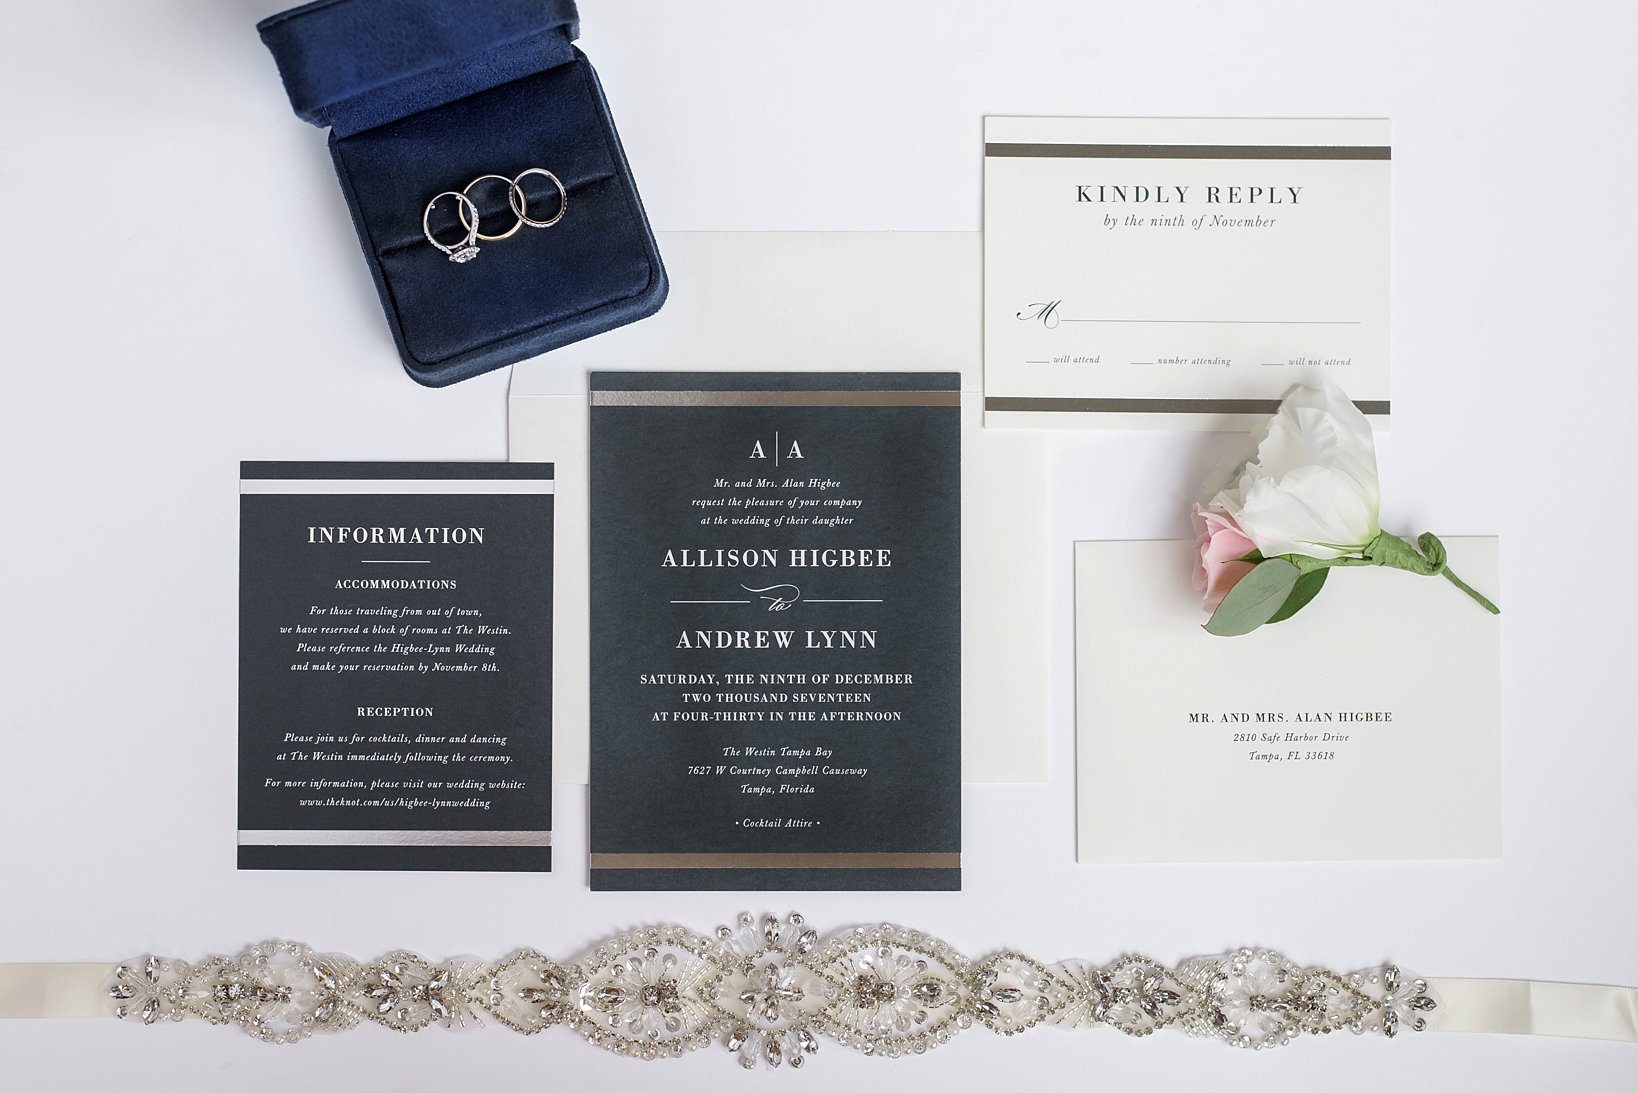 Wedding Invitation suite with Bridal accents of a dress belt and the wedding rings